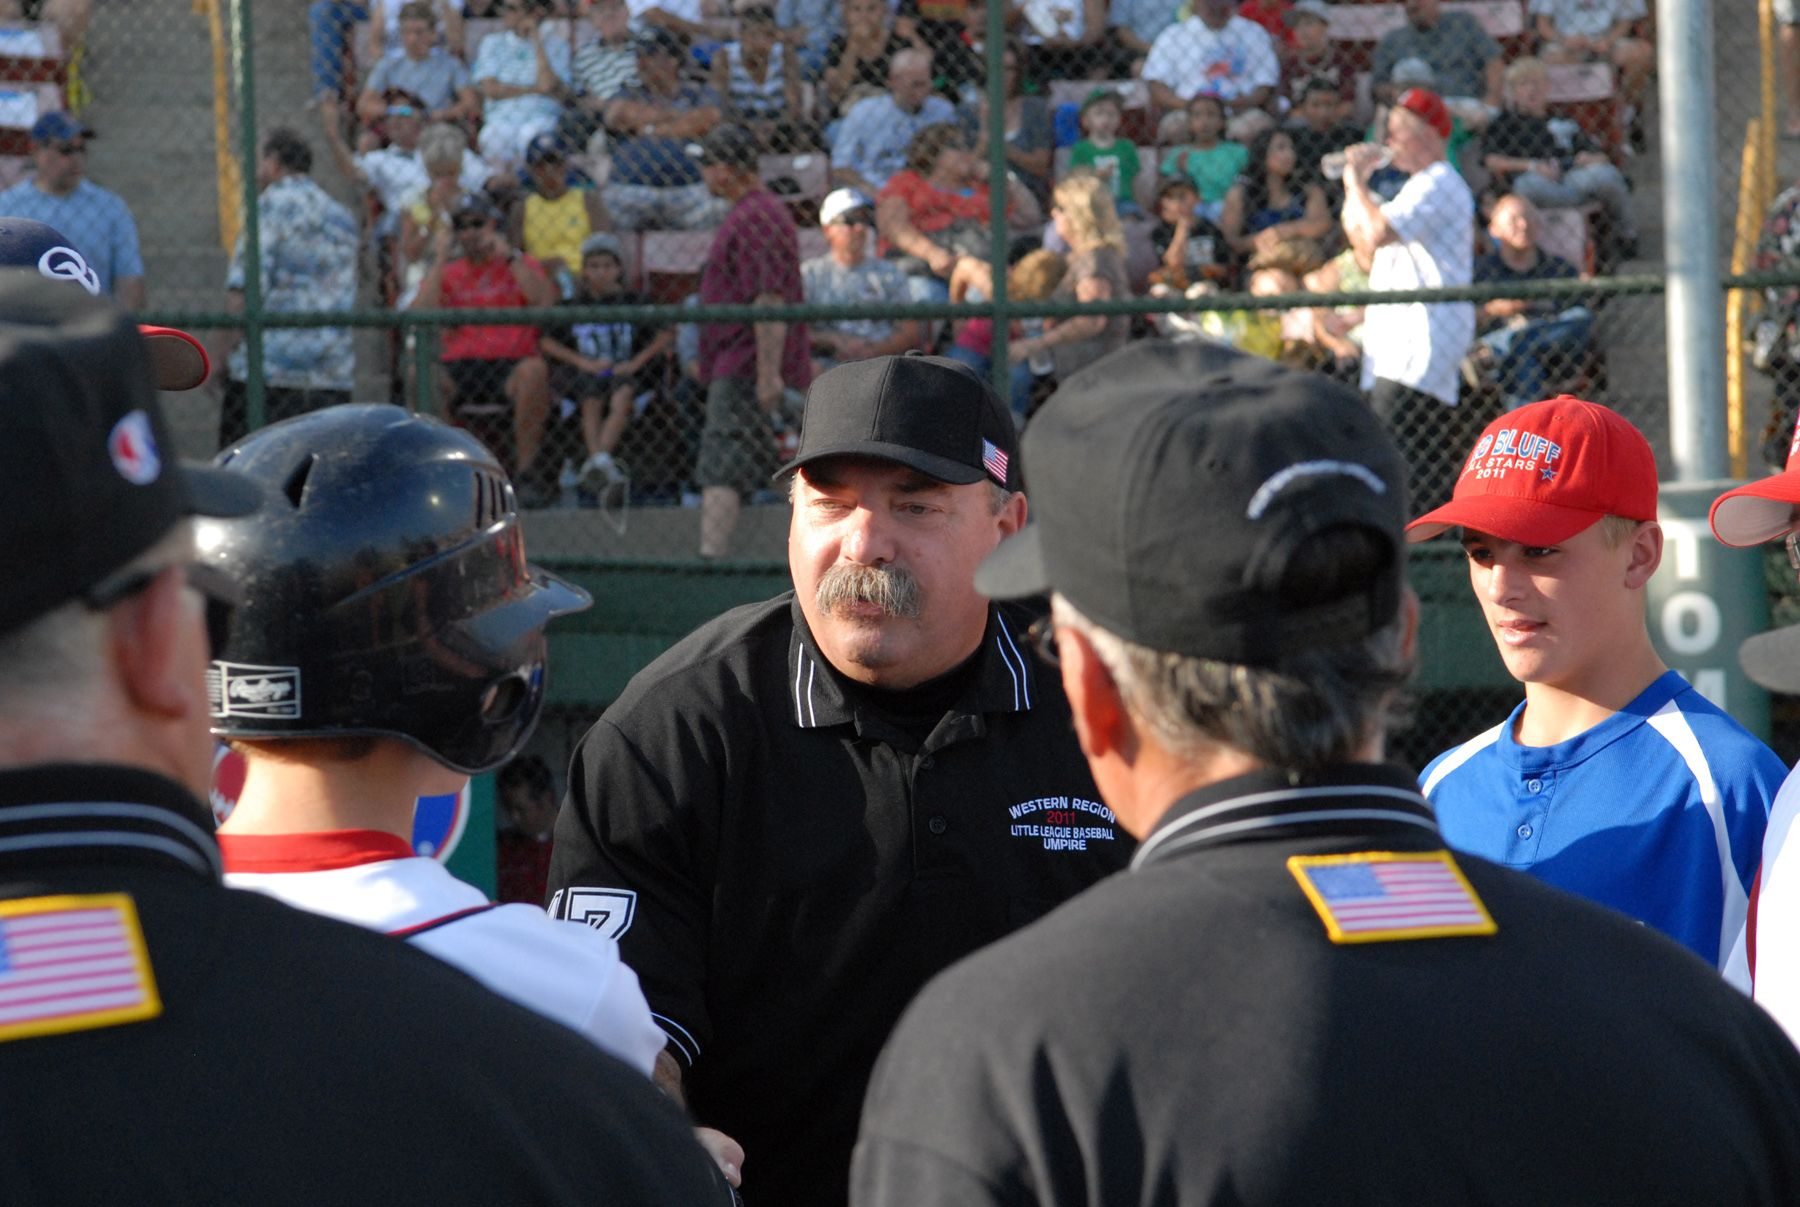 Nick Haluschak of Vancouver got the opportunity to be the home plate umpire at the Little League Baseball Western Regional Tournament in San Bernardino, Calif.